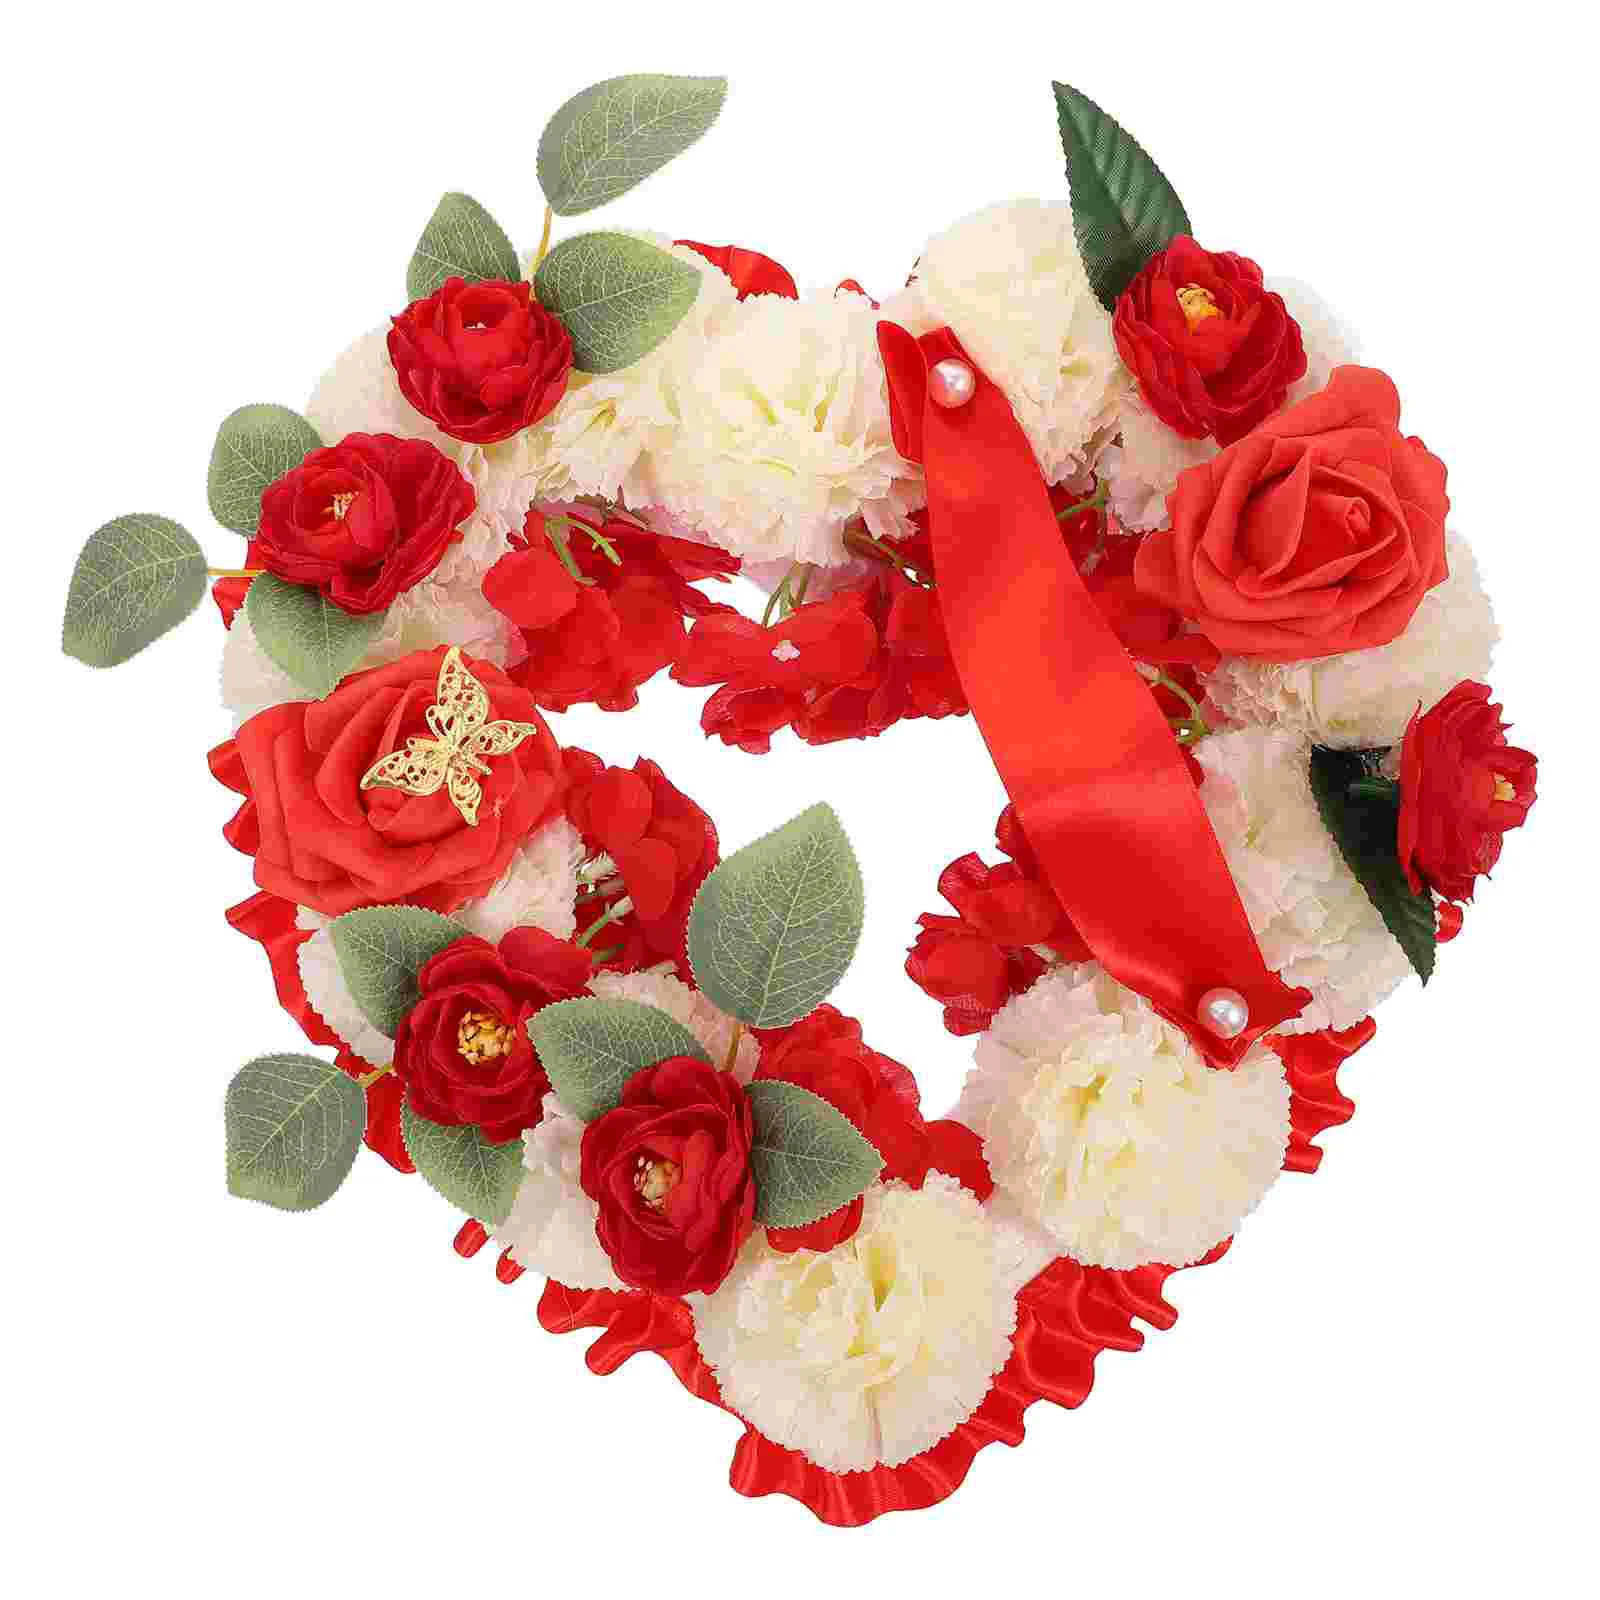 

Heart Memorial Wreath Cemetery Flower Rose Funeral Commemoration Mourning Artificial Garland Decor Chic Fake Roses Gift